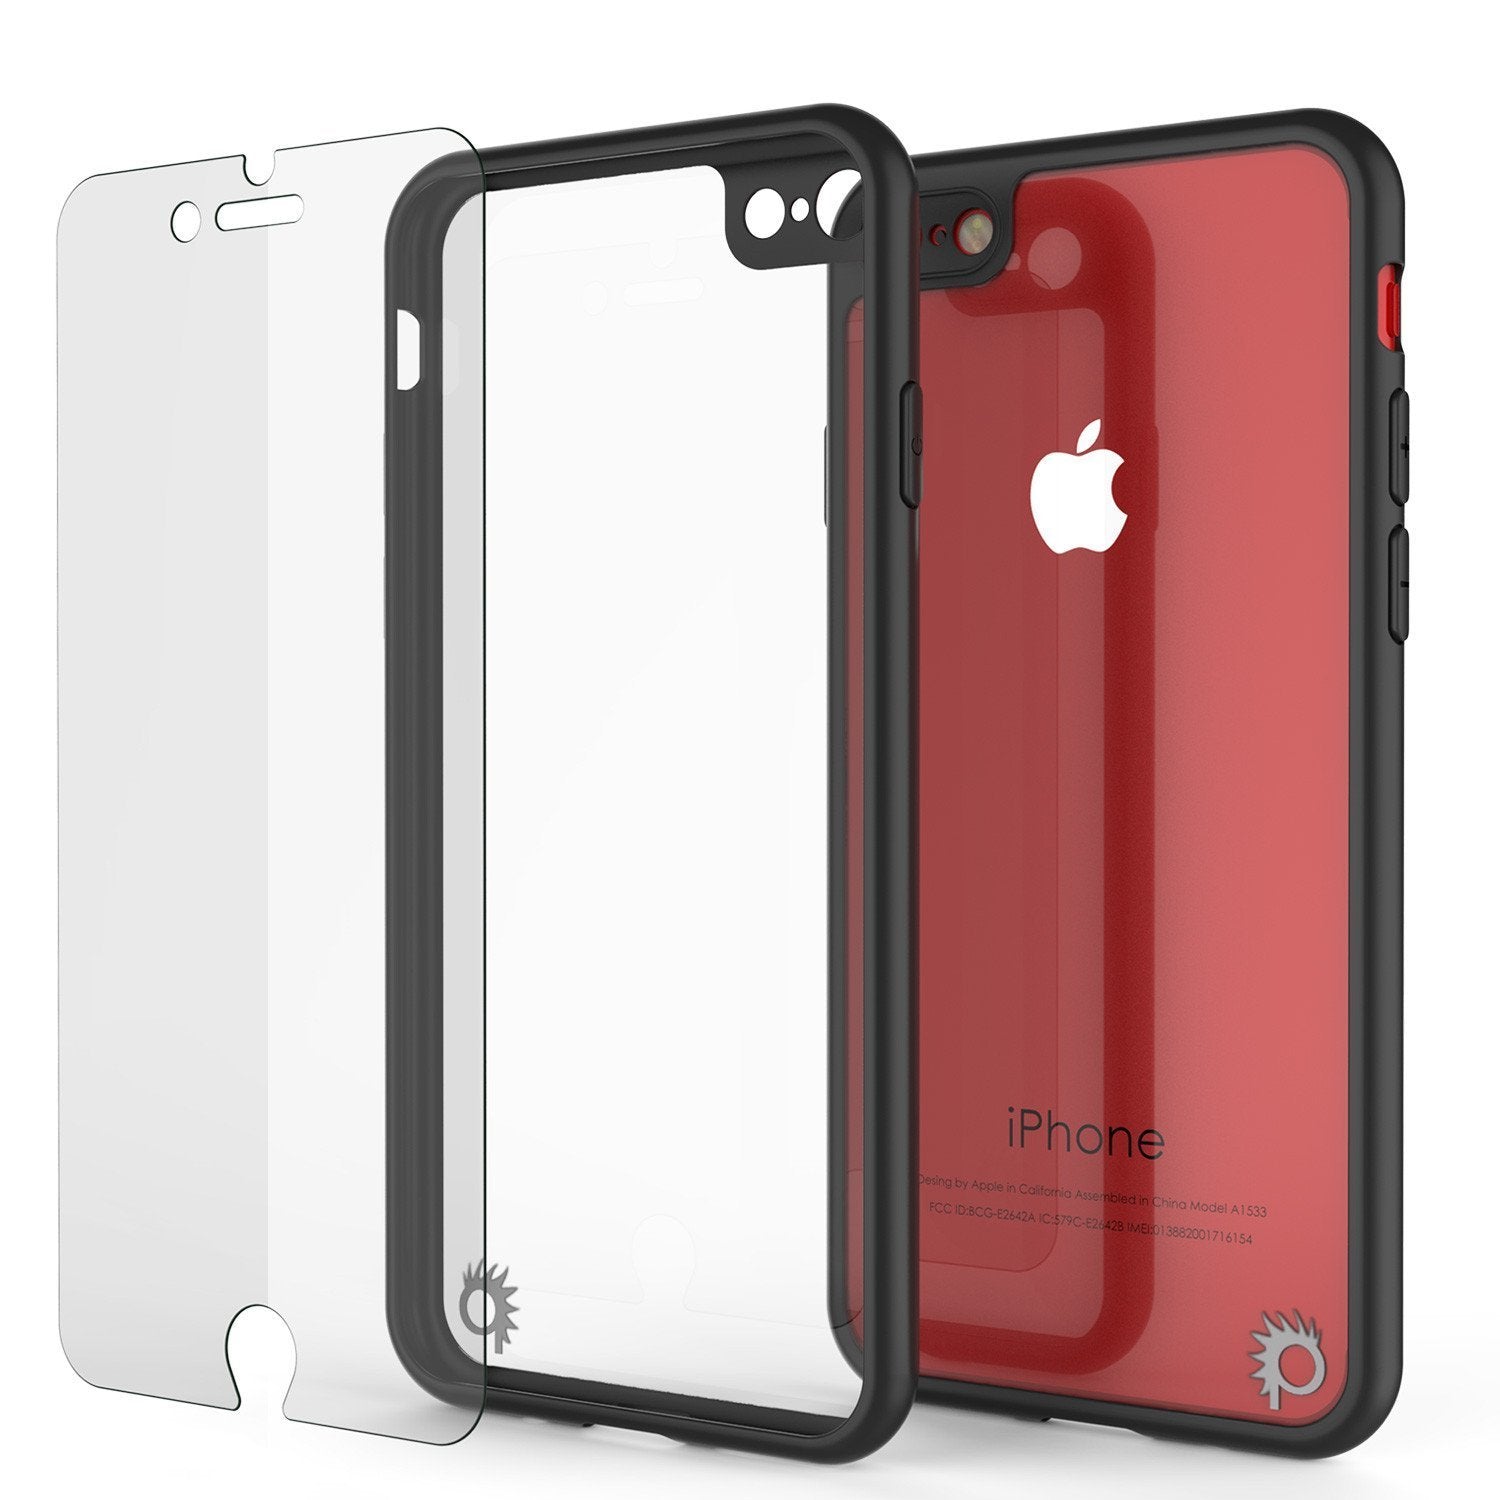 iPhone 8 Case [MASK Series] [BLACK] Full Body Hybrid Dual Layer TPU Cover W/ protective Tempered Glass Screen Protector